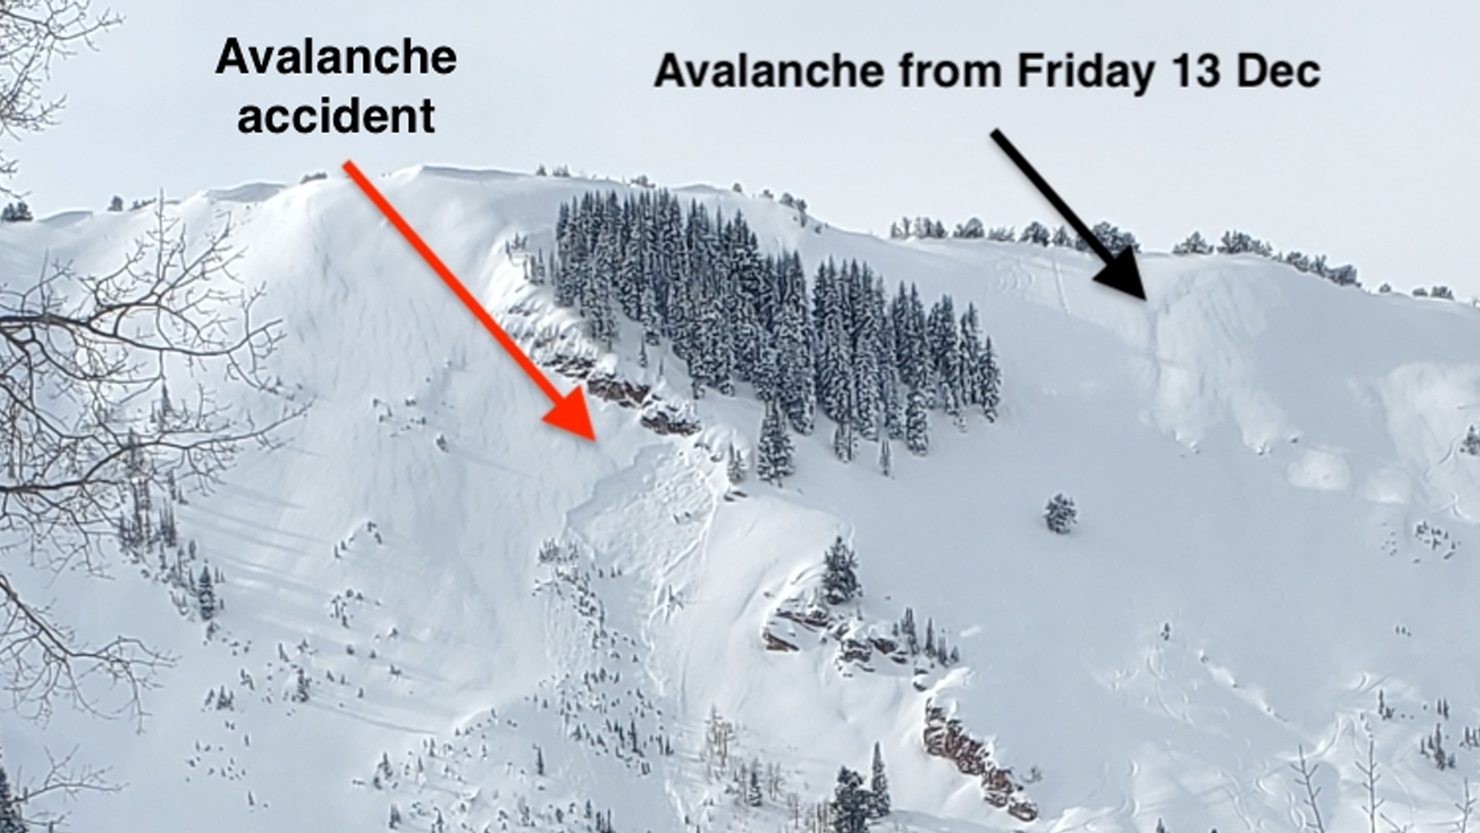 Snowboarder dies in avalanche he triggered